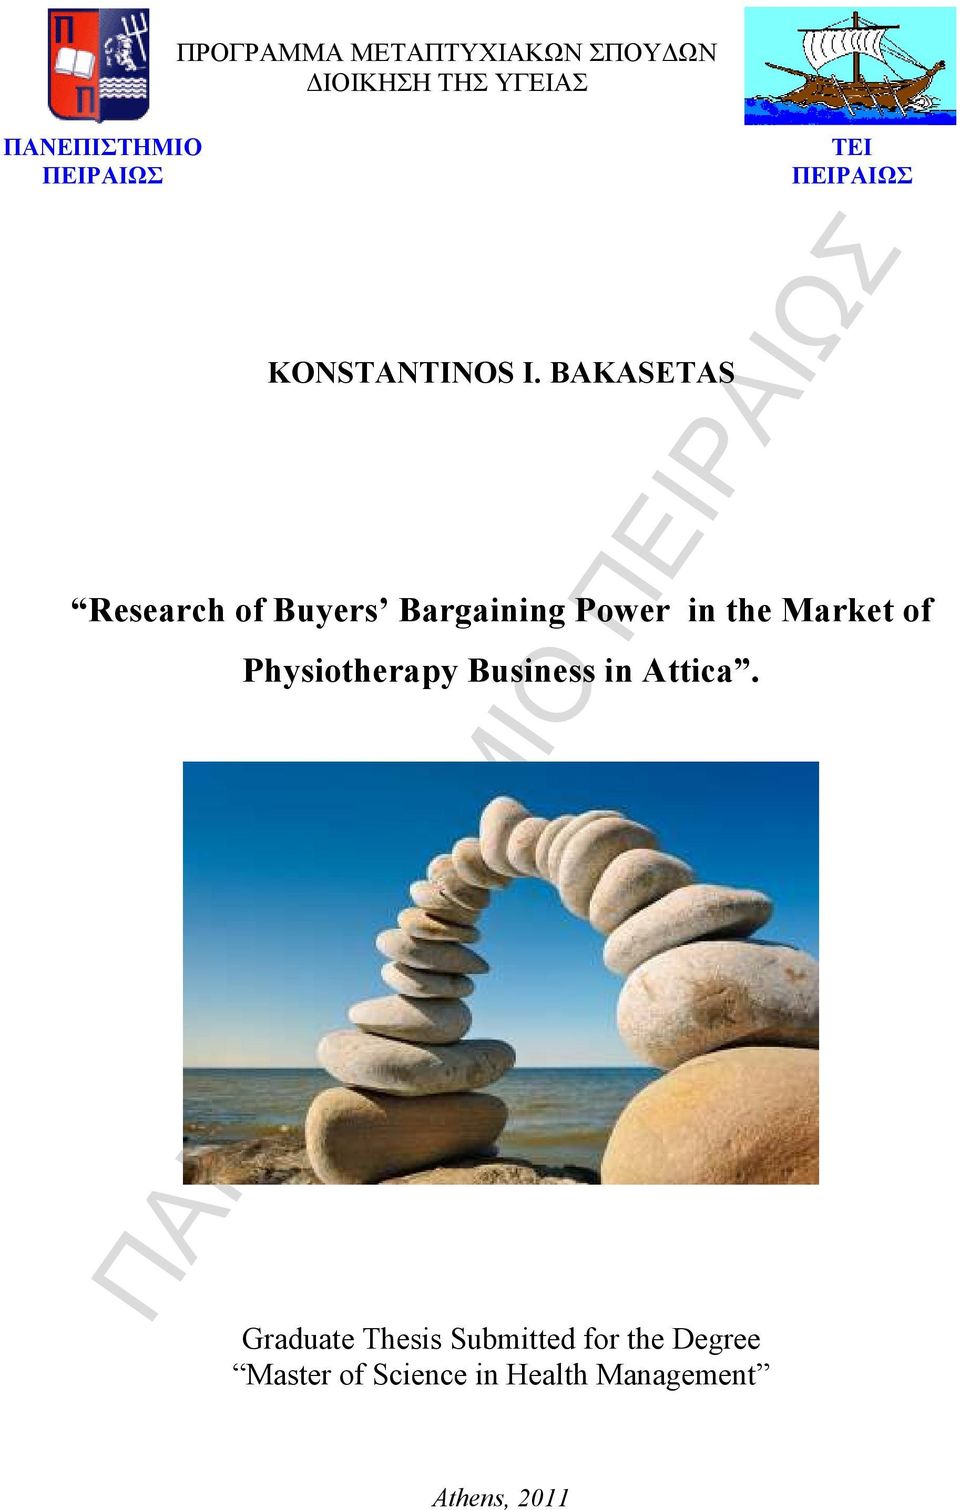 BAKASETAS Research of Buyers Bargaining Power in the Market of